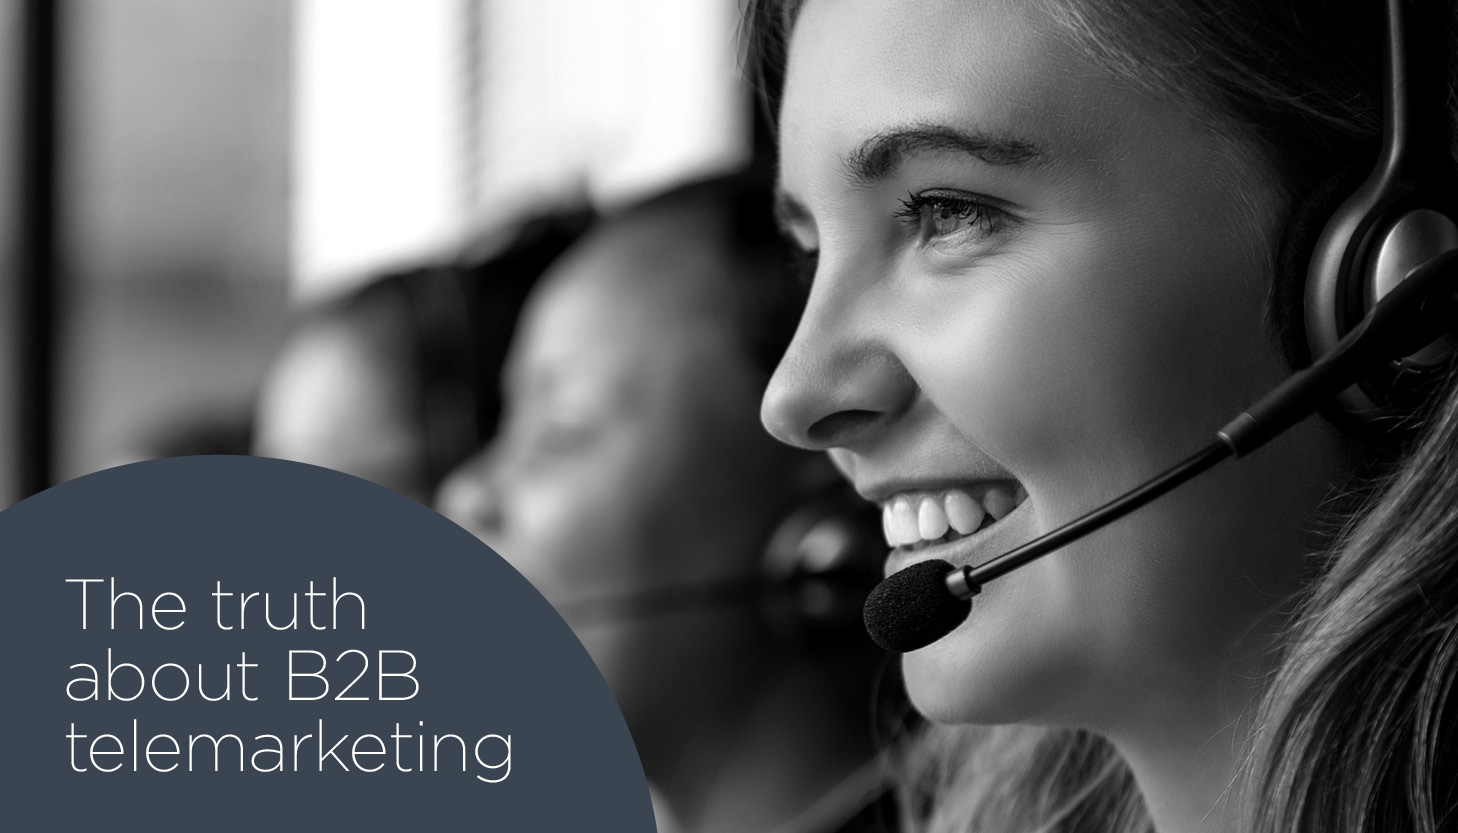 Demand strategy - The truth about B2B Telemarketing